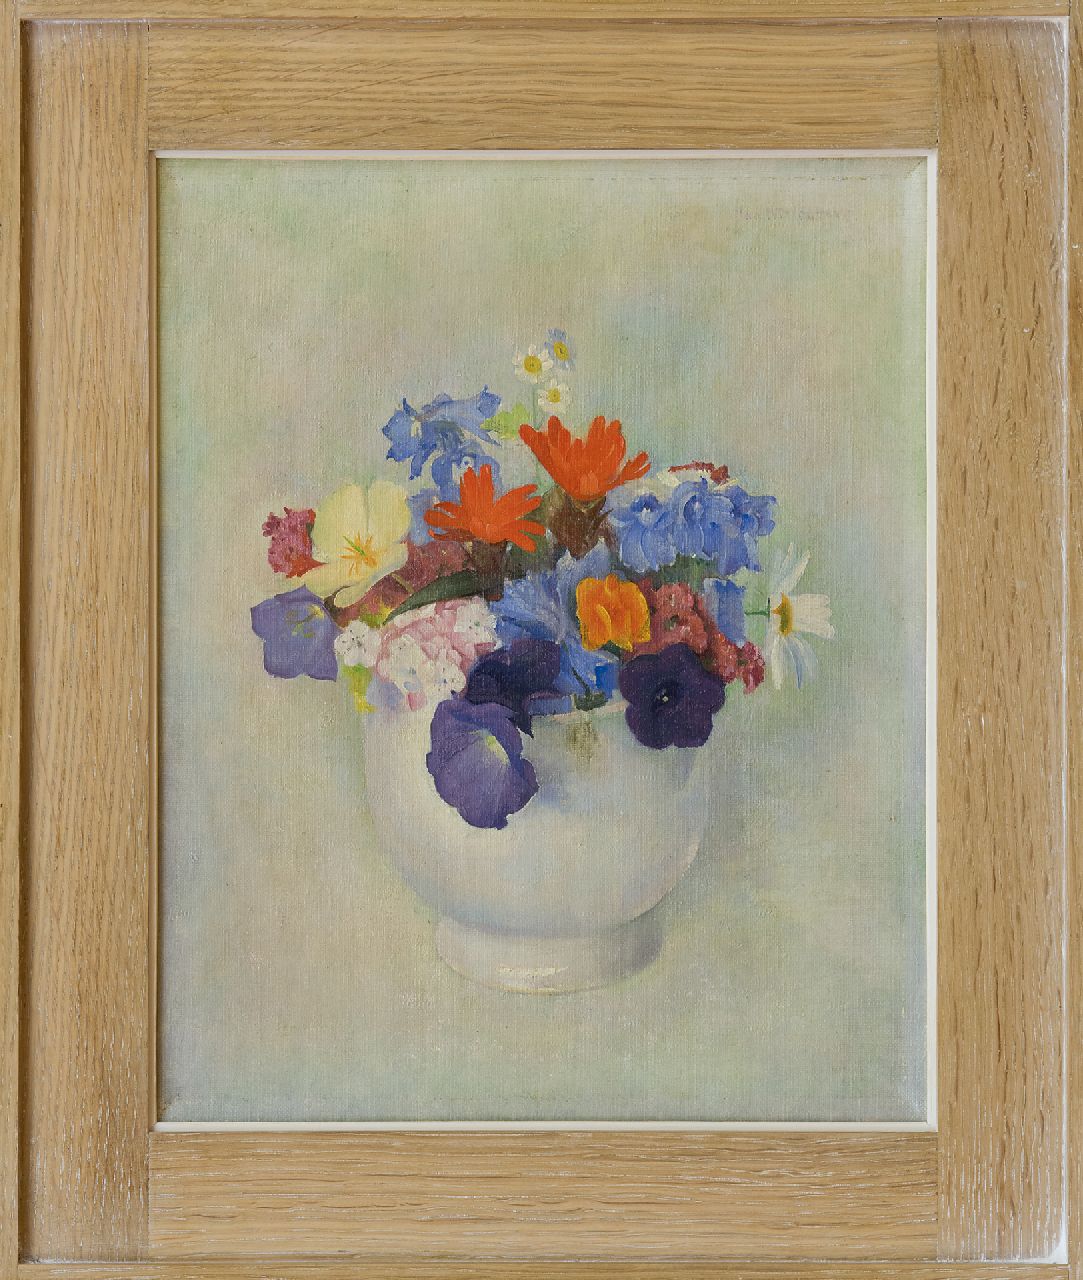 Wittenberg J.H.W.  | 'Jan' Hendrik Willem Wittenberg | Paintings offered for sale | Flower still life, oil on canvas 29.8 x 24.0 cm, signed u.r. and painted ca. 1940